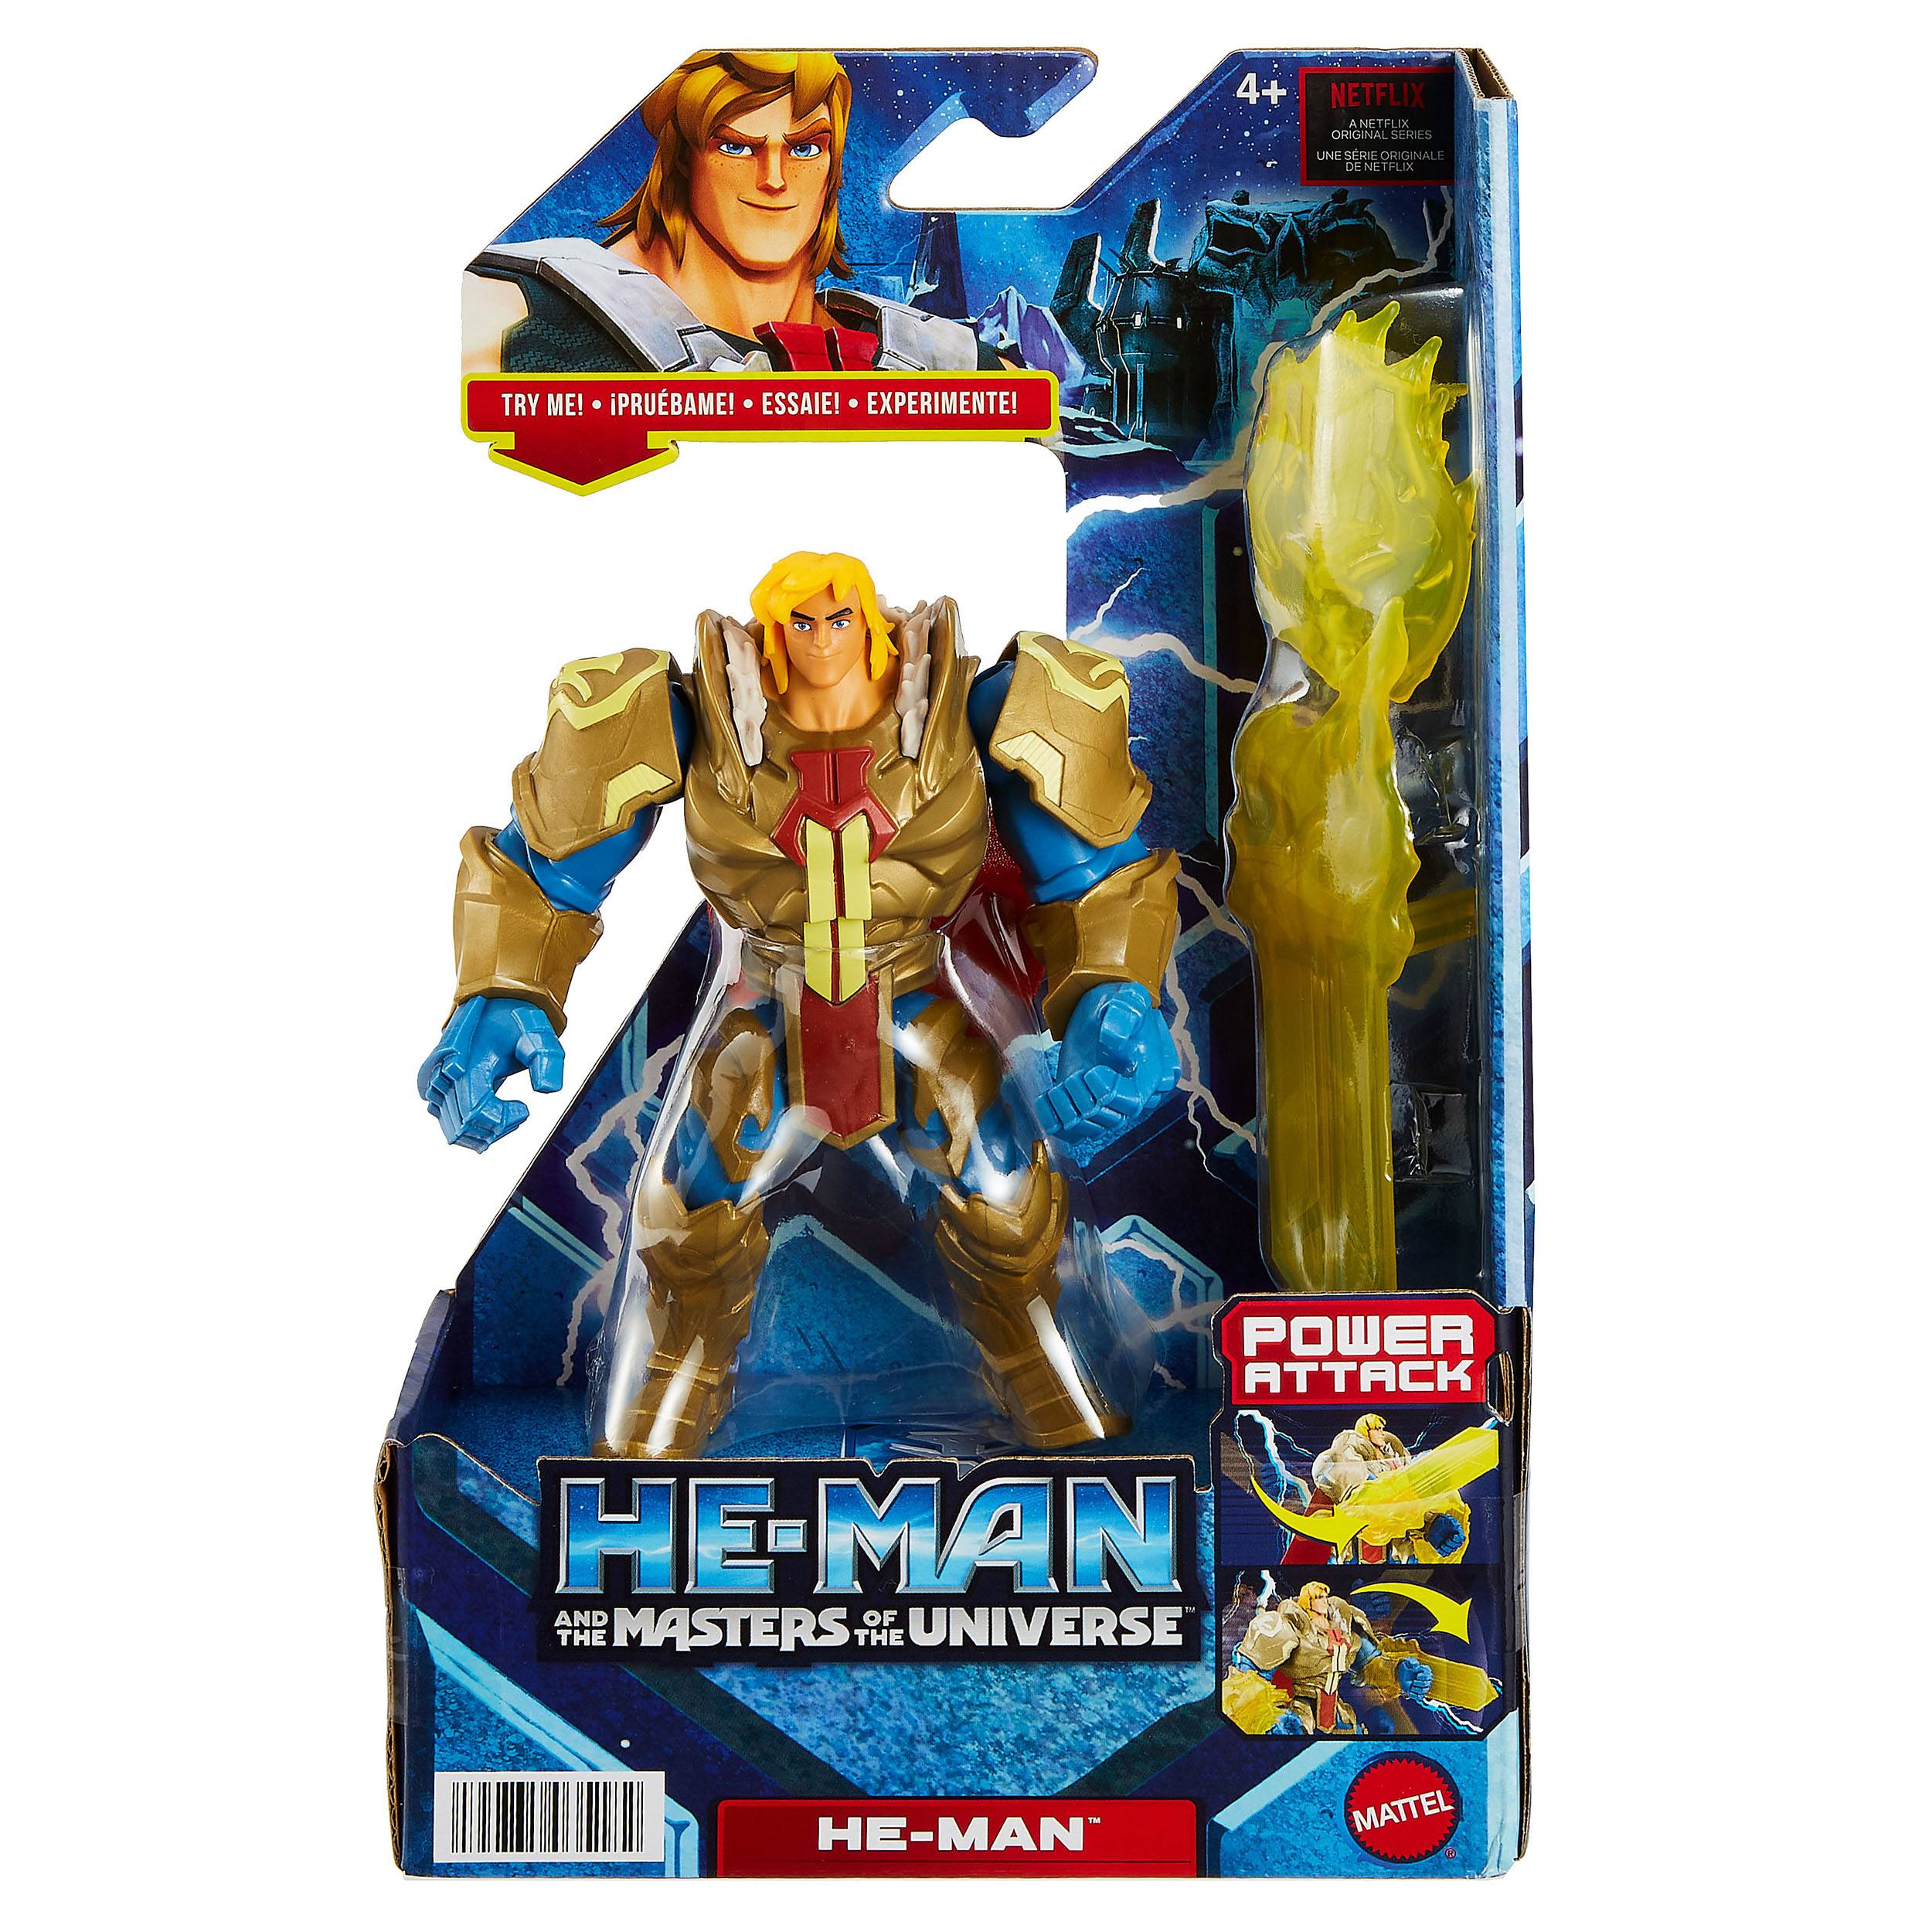 He-Man and the Masters of the Universe Actionfigur 2022 Deluxe He-Man 14 cm MATTHDY37 0194735035182